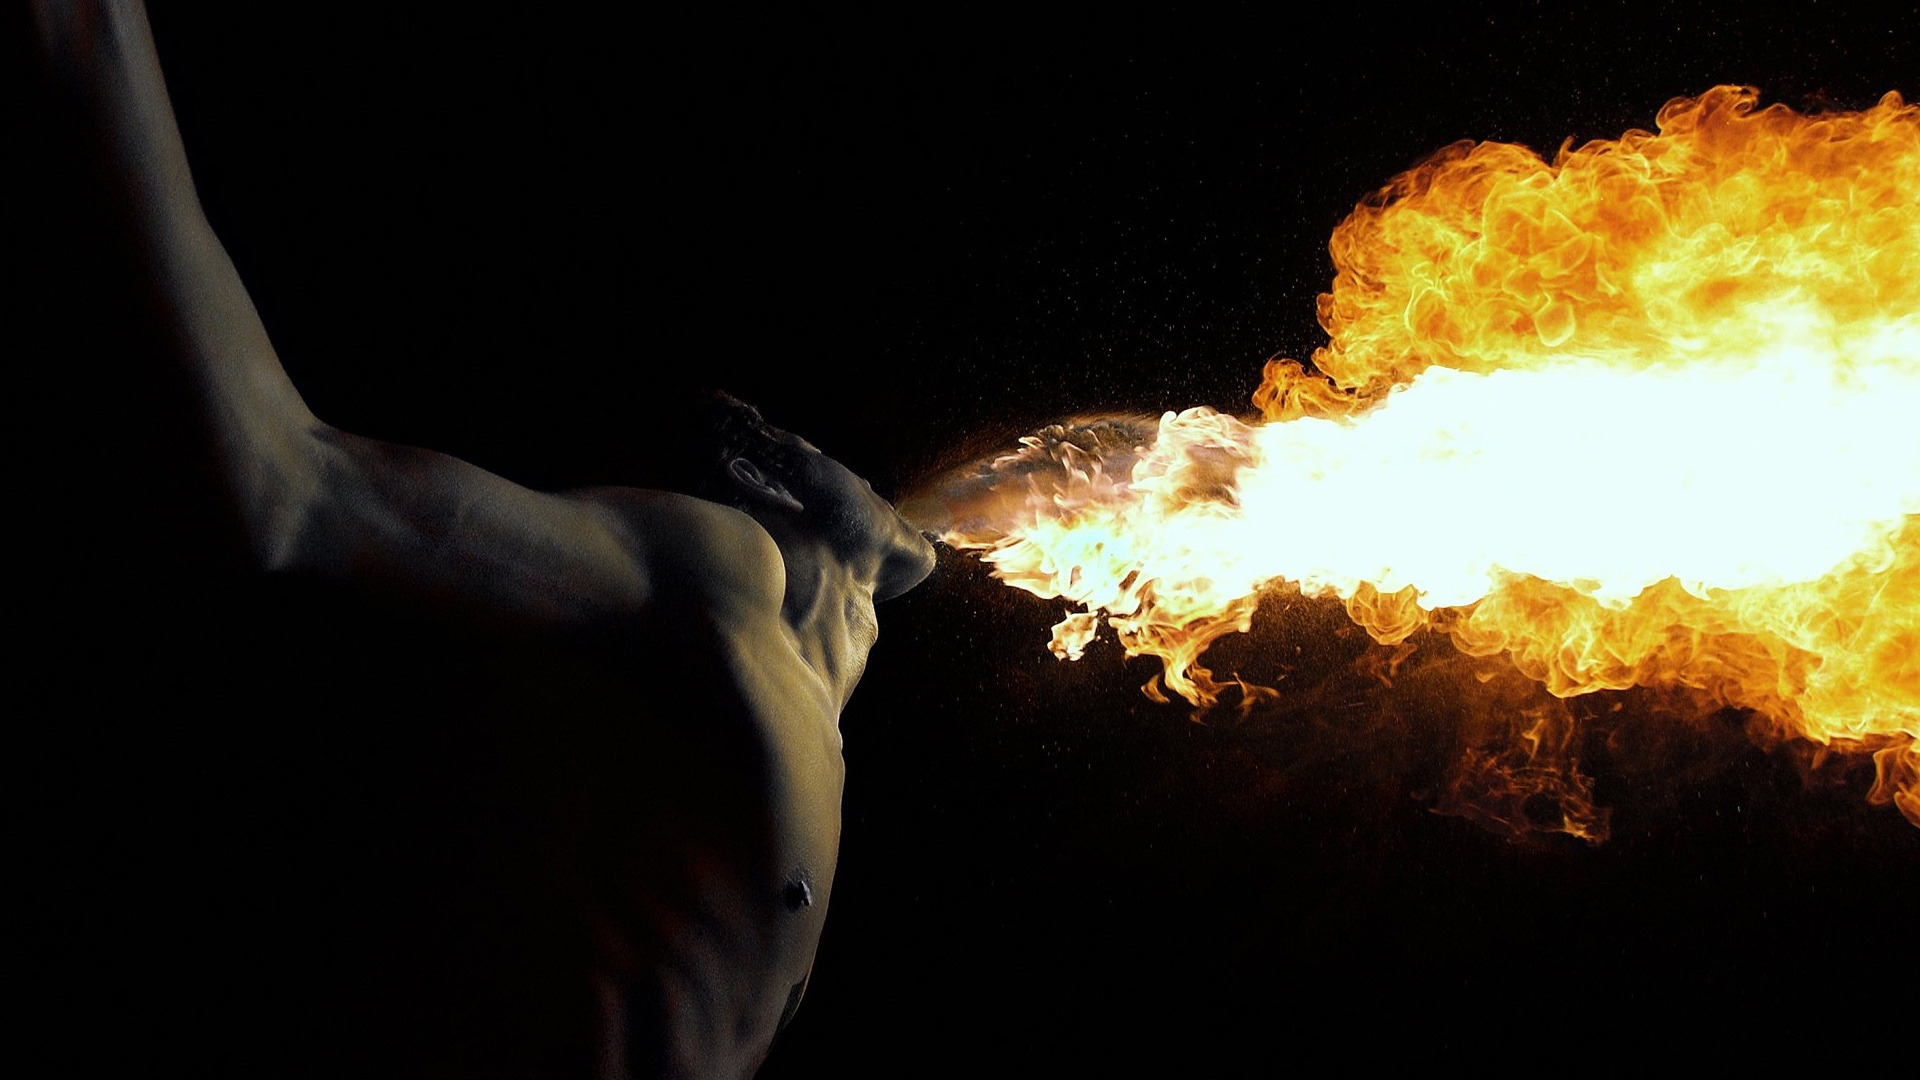 Man spit fire for 1920 x 1080 HDTV 1080p resolution